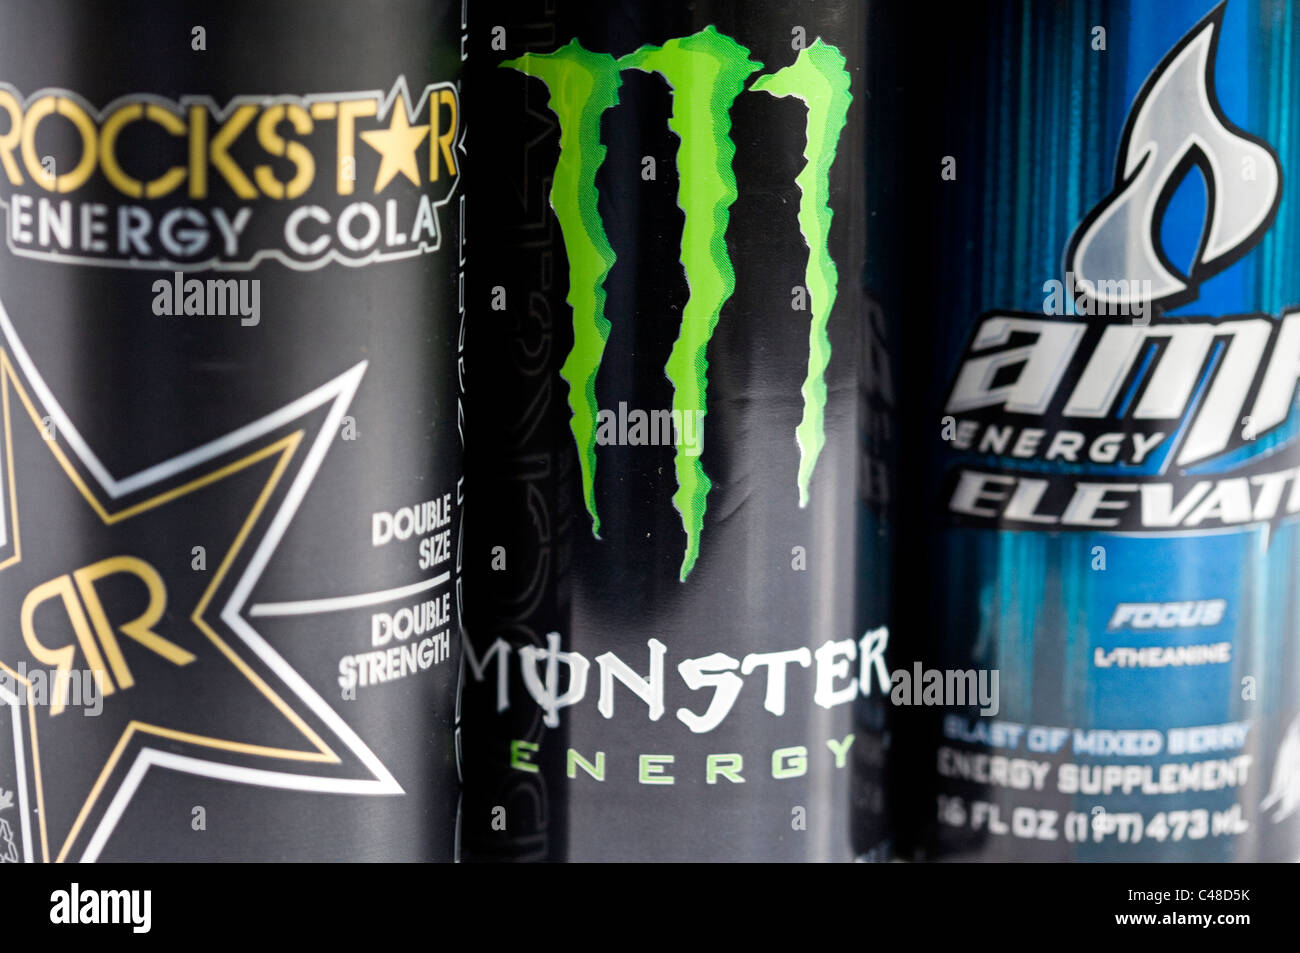 A mix os RockStar, Monster, AMP and Red Bull energy drinks.  Stock Photo